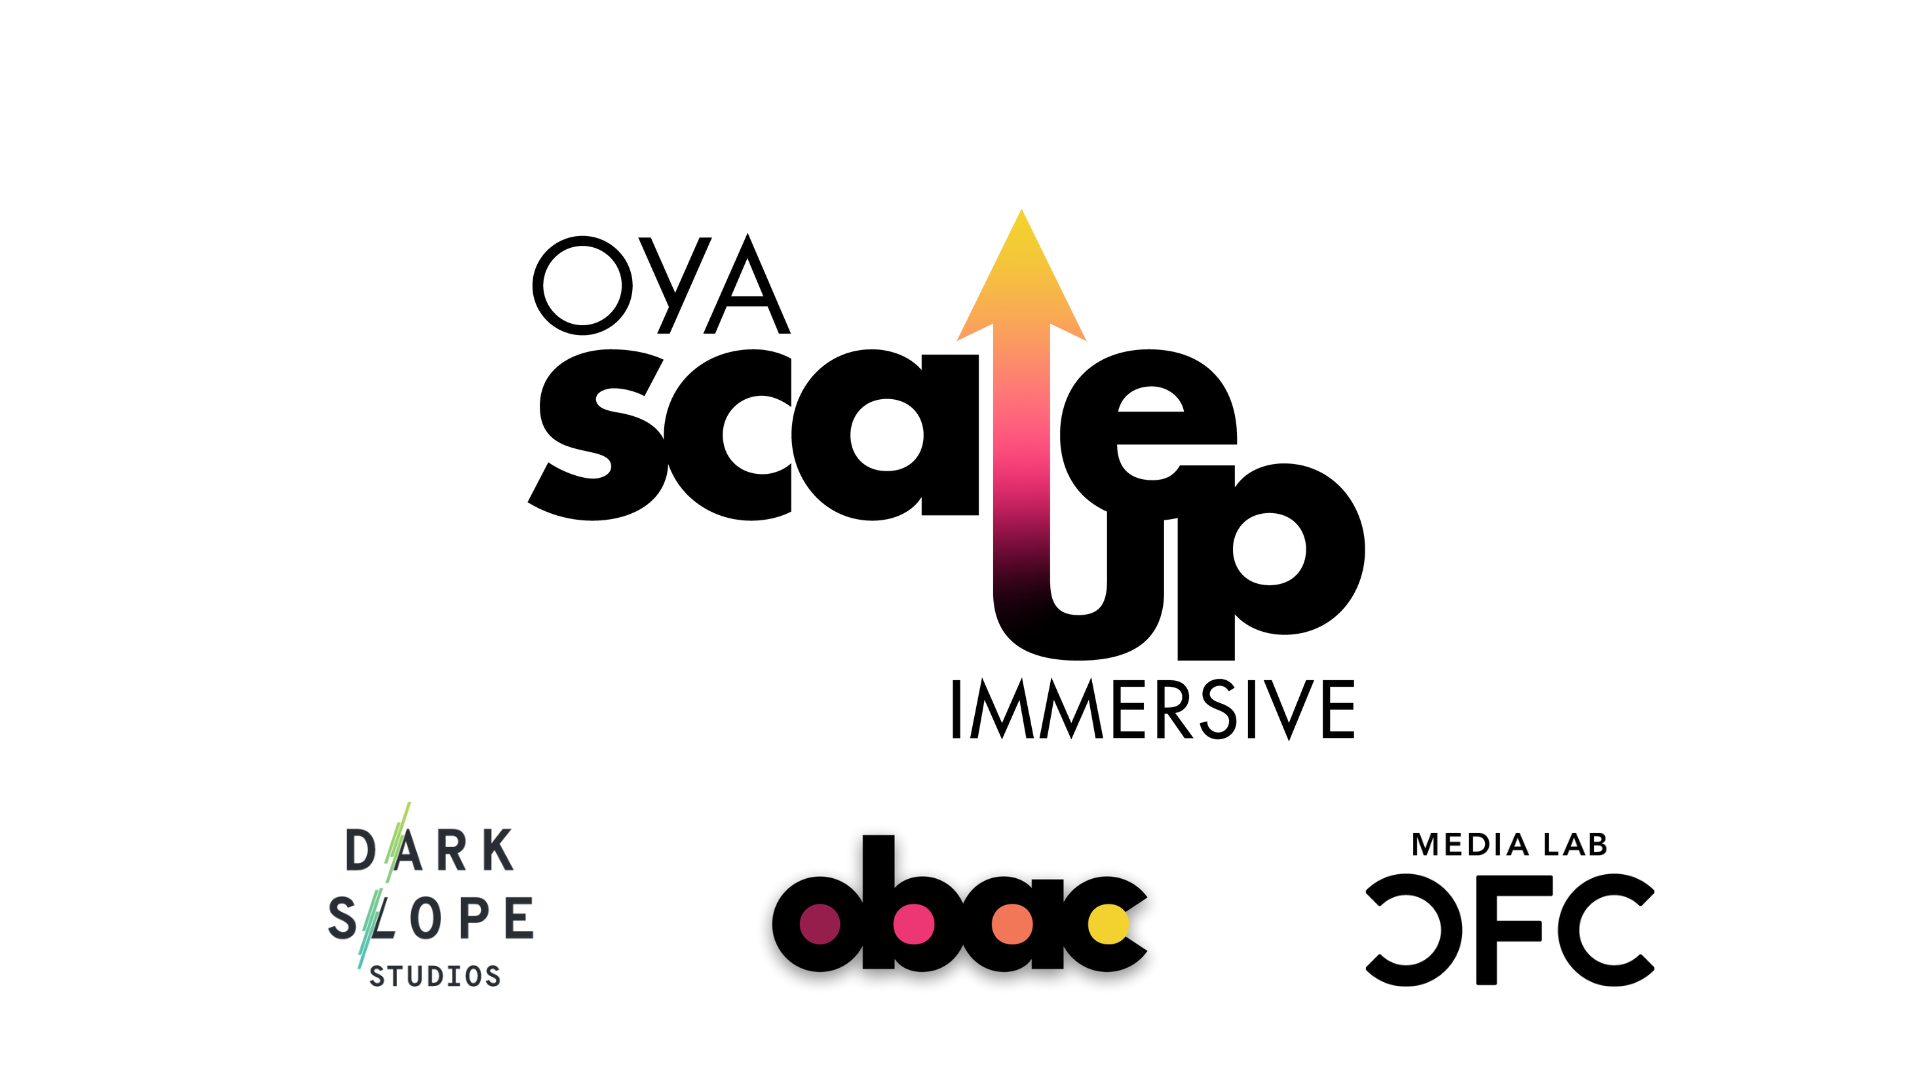 OYA Scale Up Immersive in collaboration with Dark Slope Studios OBAC and the CFC Media Lab